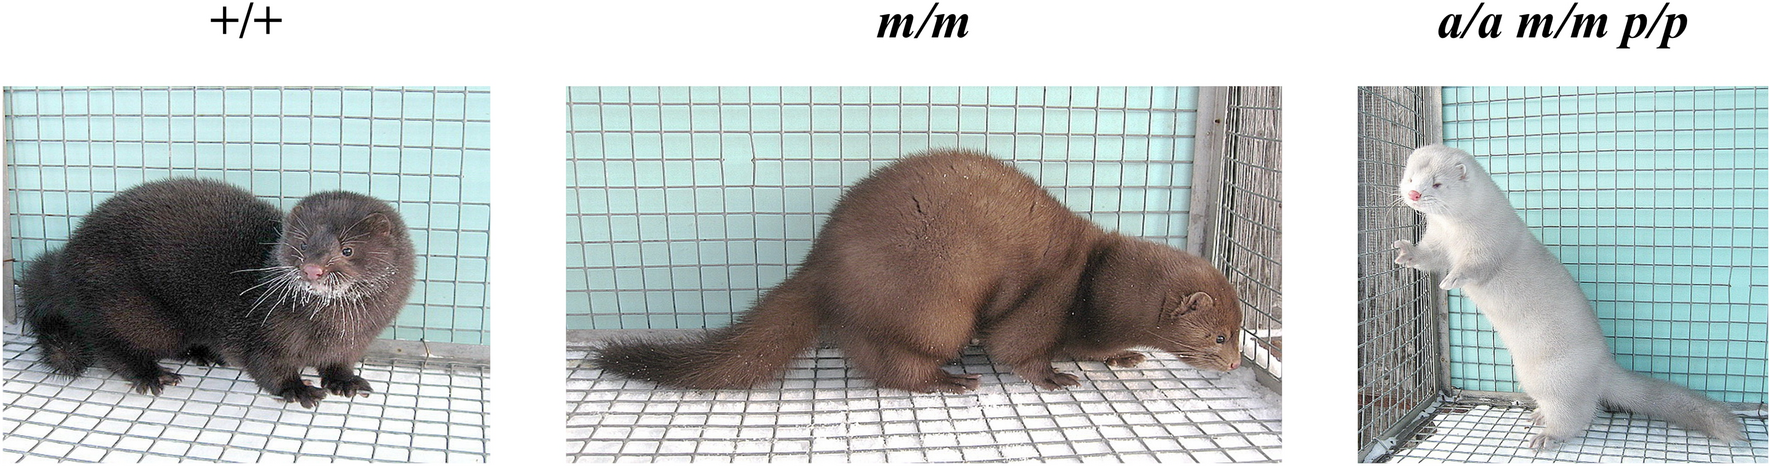 Genome analysis of American minks reveals link of mutations in Ras-related  protein-38 gene to Moyle brown coat phenotype | Scientific Reports